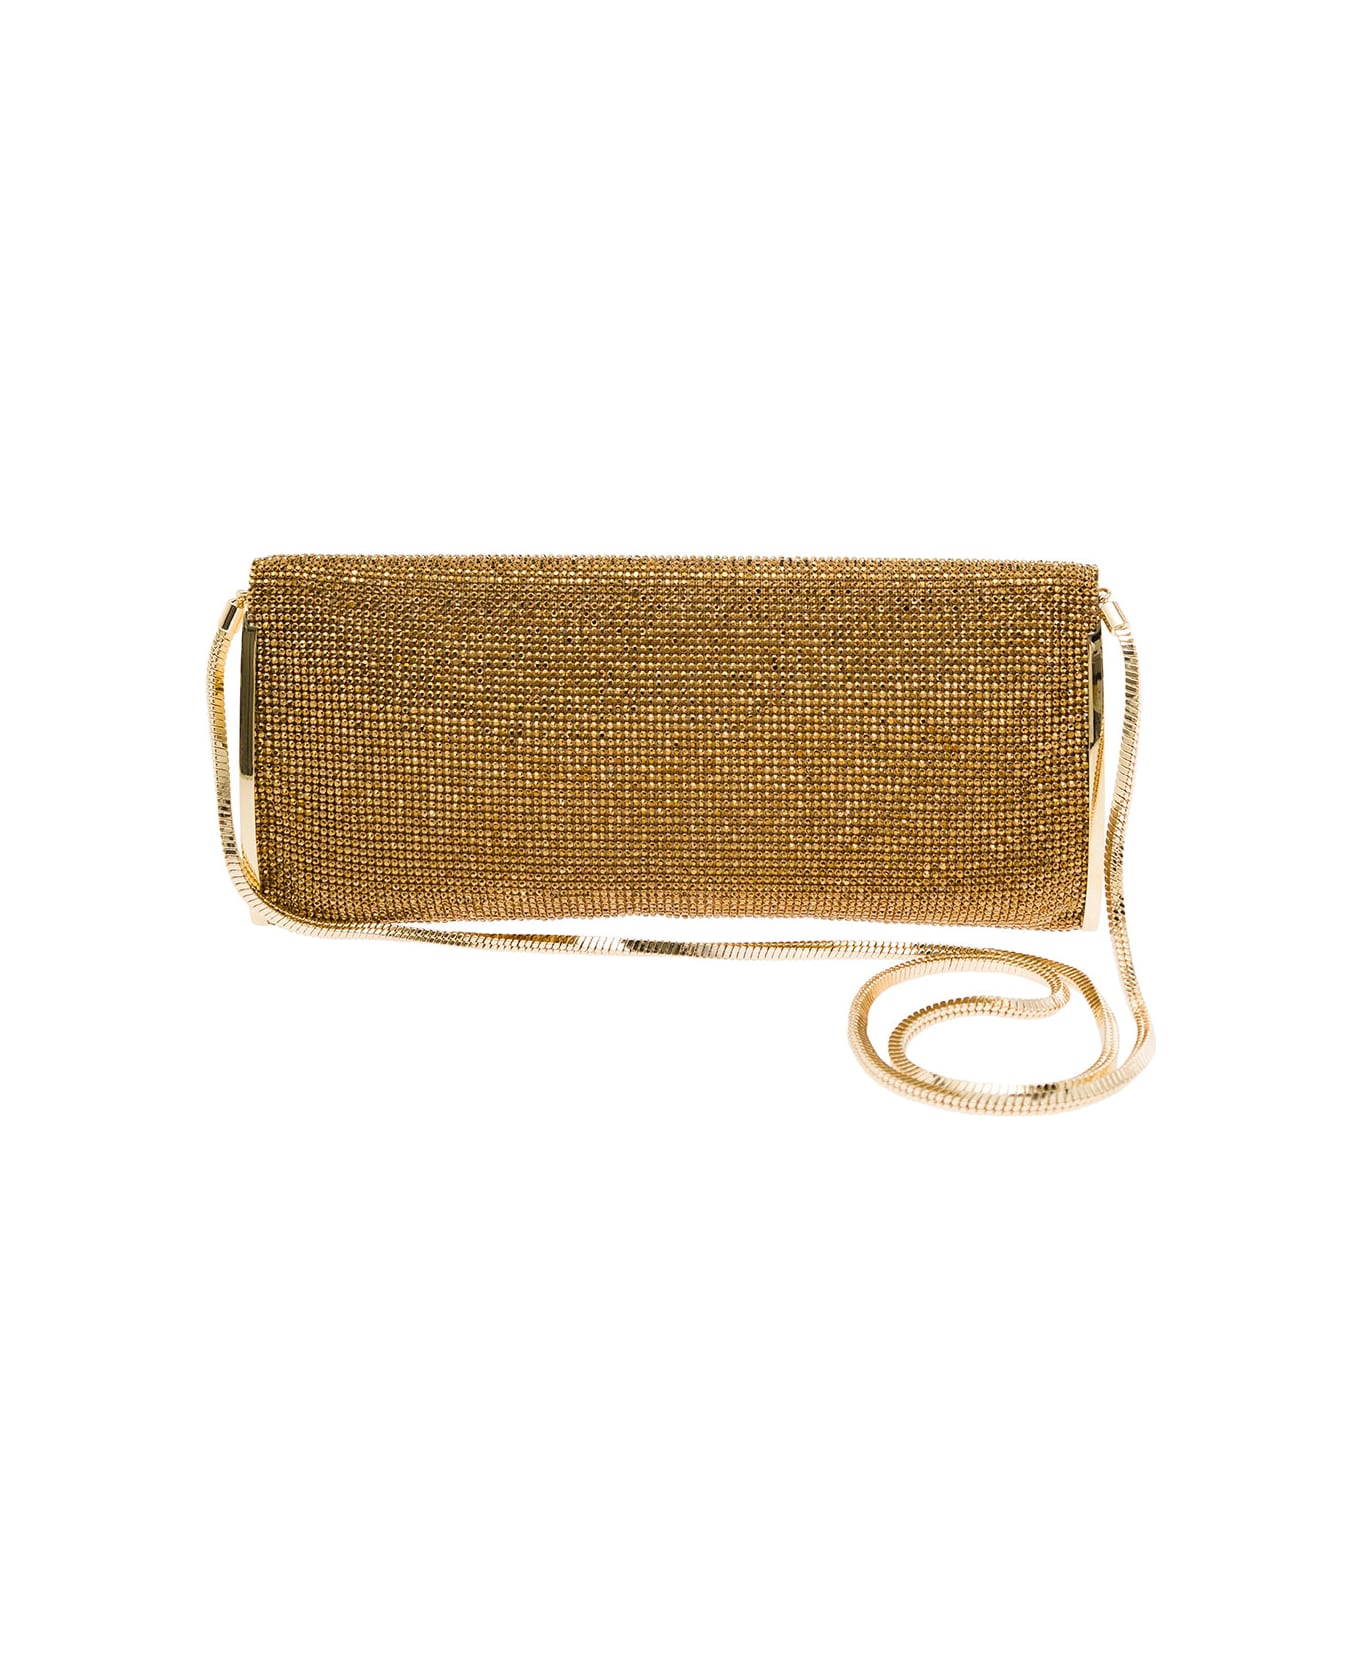 Benedetta Bruzziches 'kate' Gold Clutch With All-over Rhinestone In Mesh Woman - Metallic